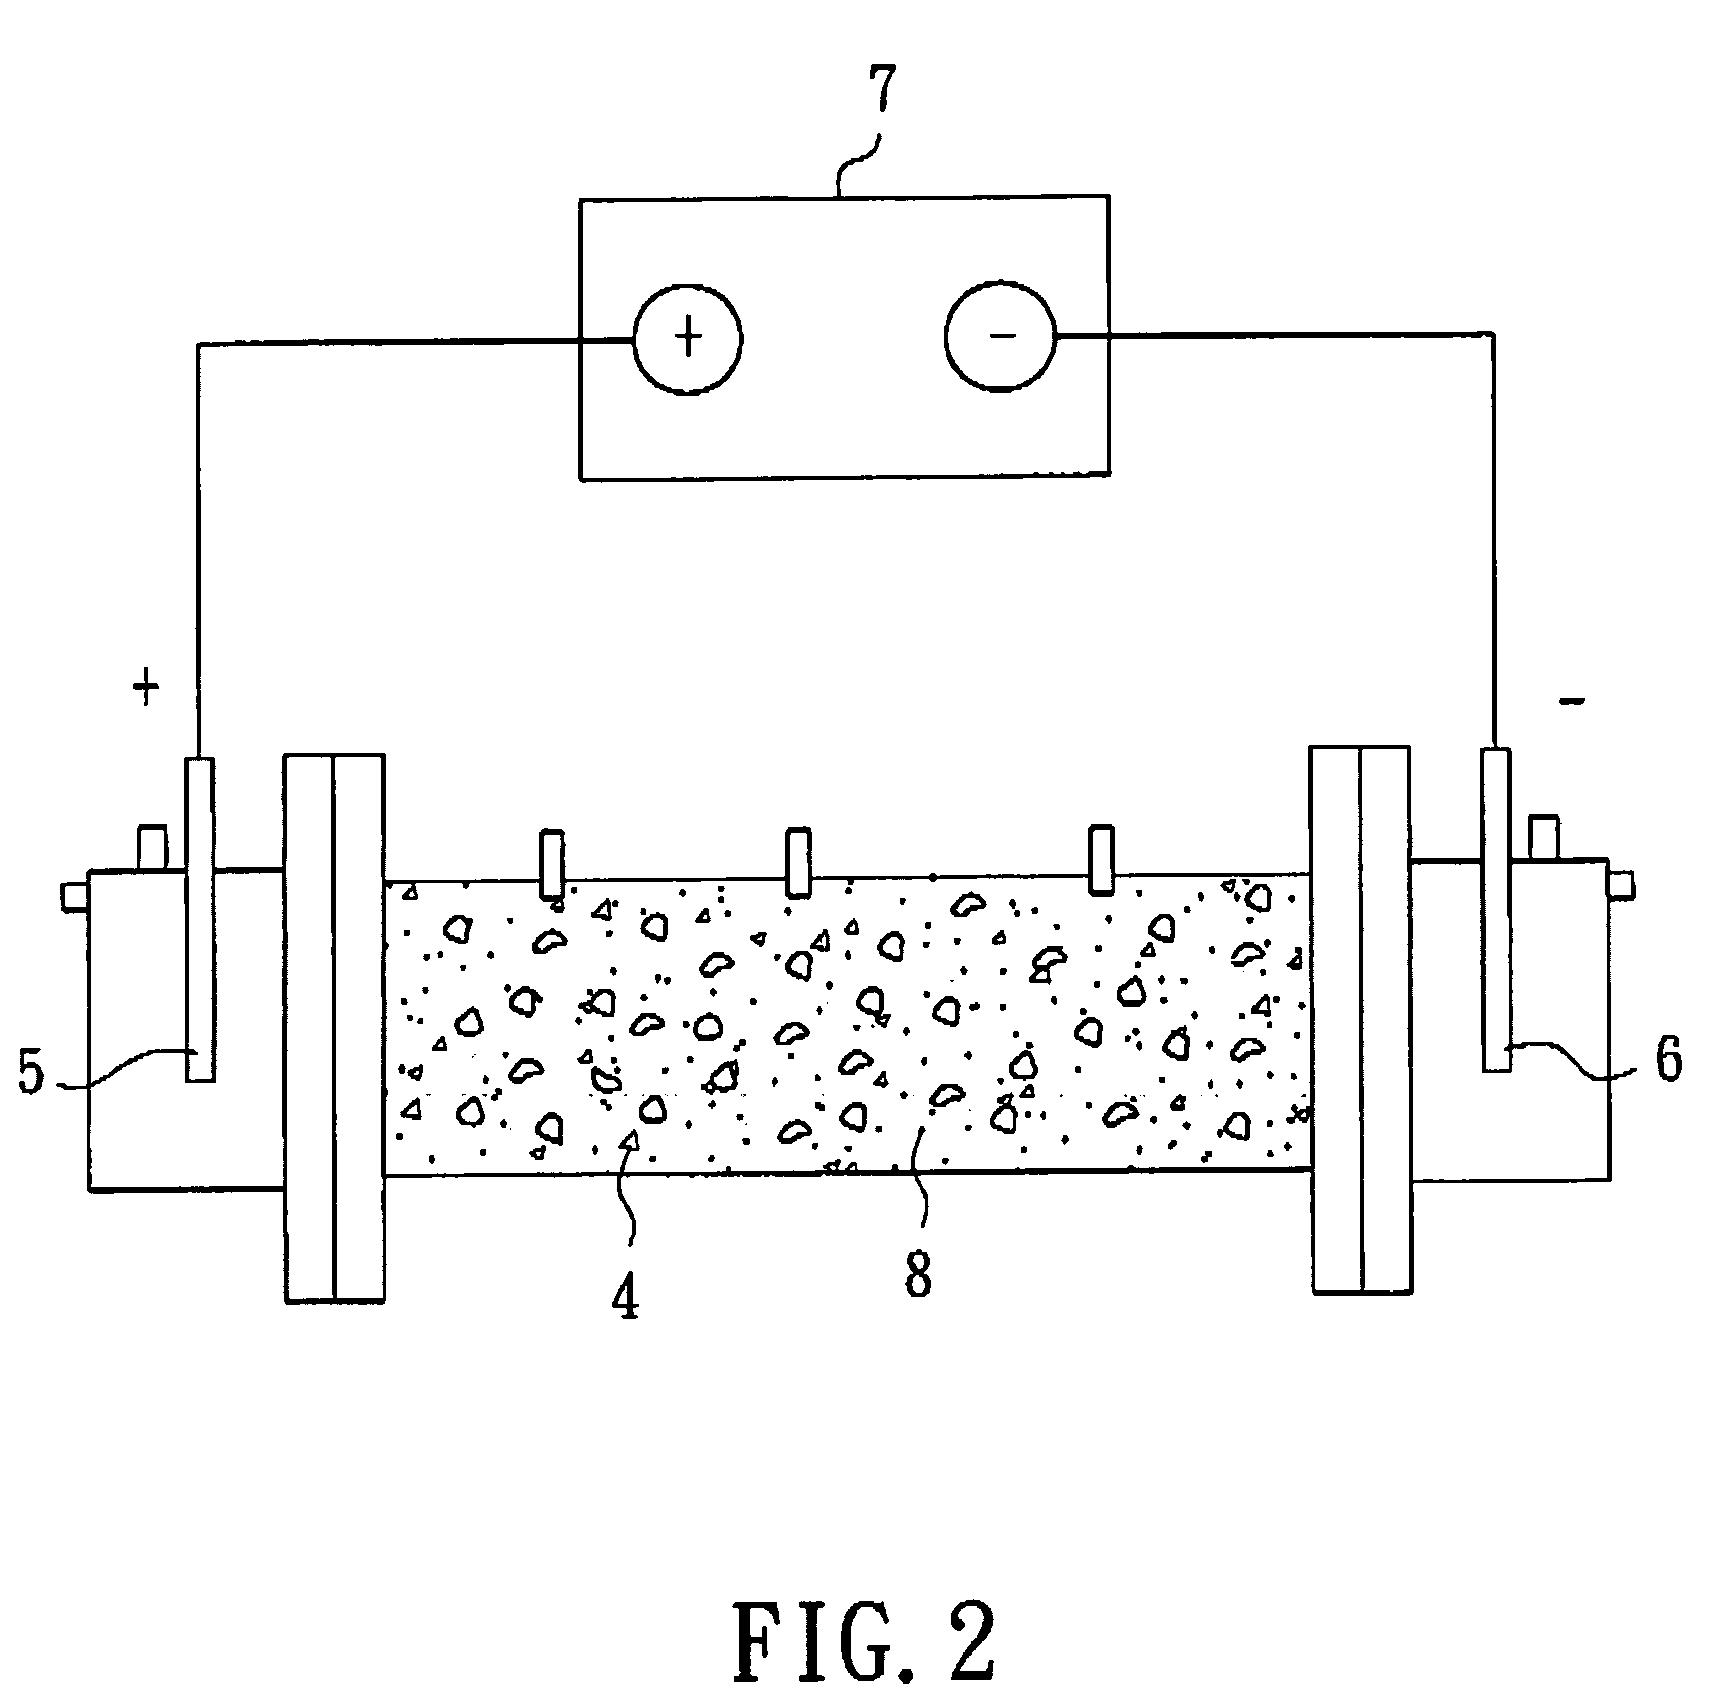 Method for treating a body of a polluted porous medium